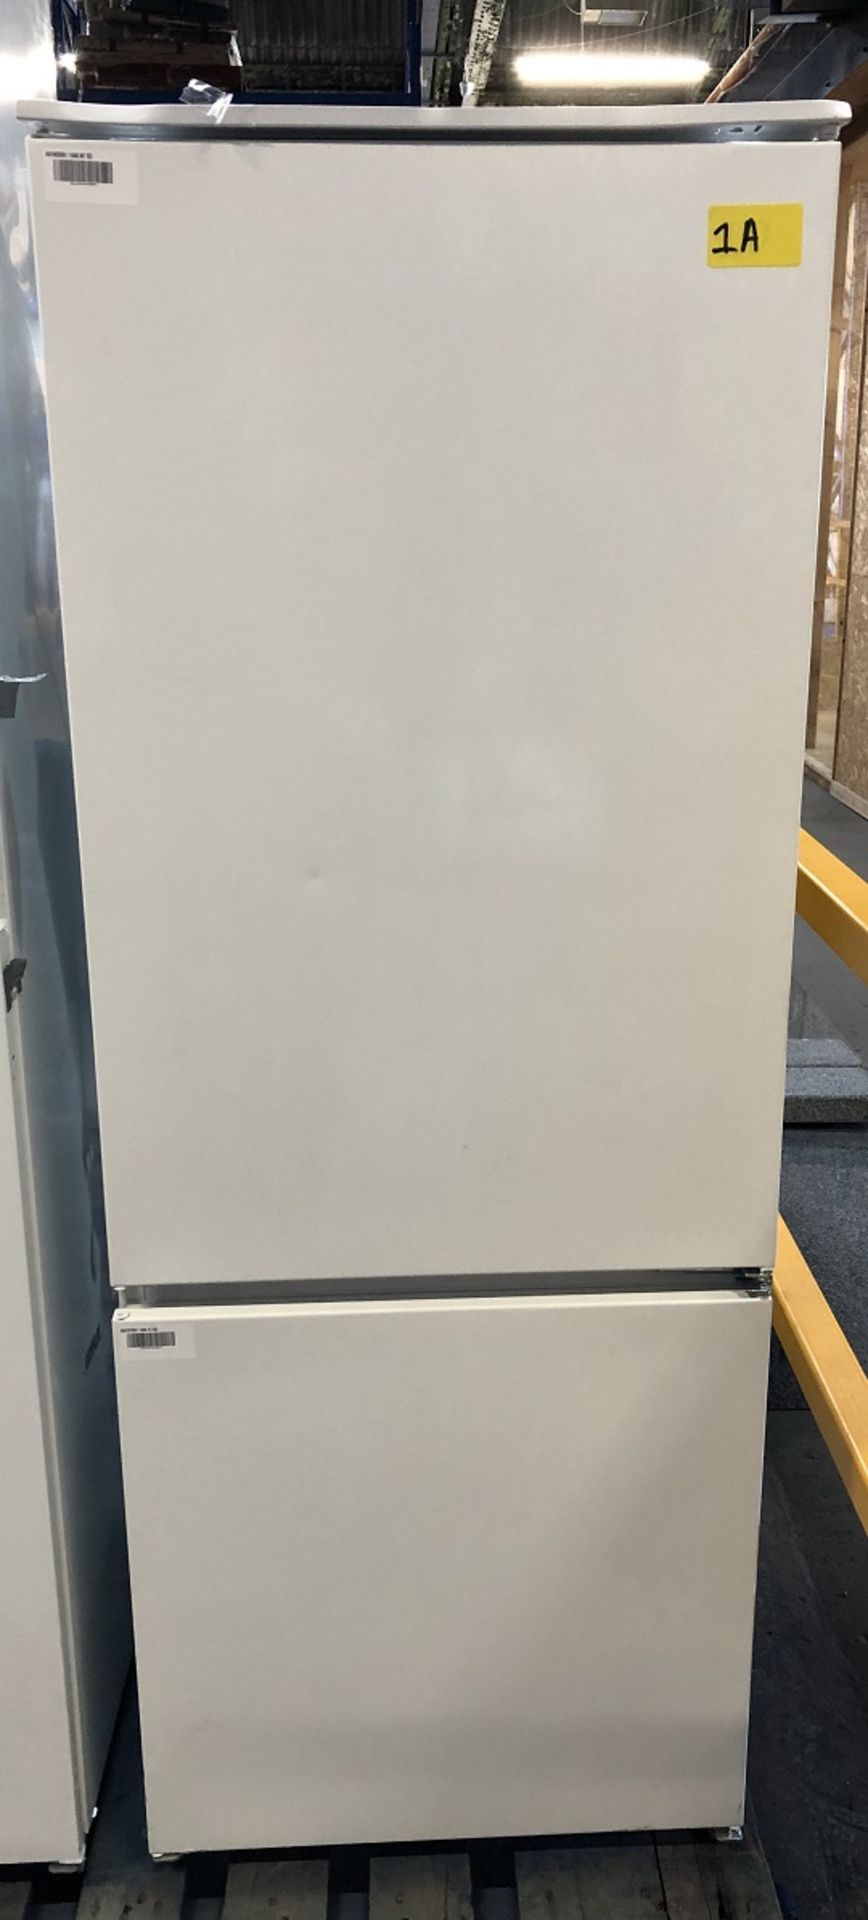 1 LOT TO CONTAIN AN UNTESTED AEG SCB5142VLS INTEGRATED FRIDGE FREEZER / RRP £629.99 / ITEM IS